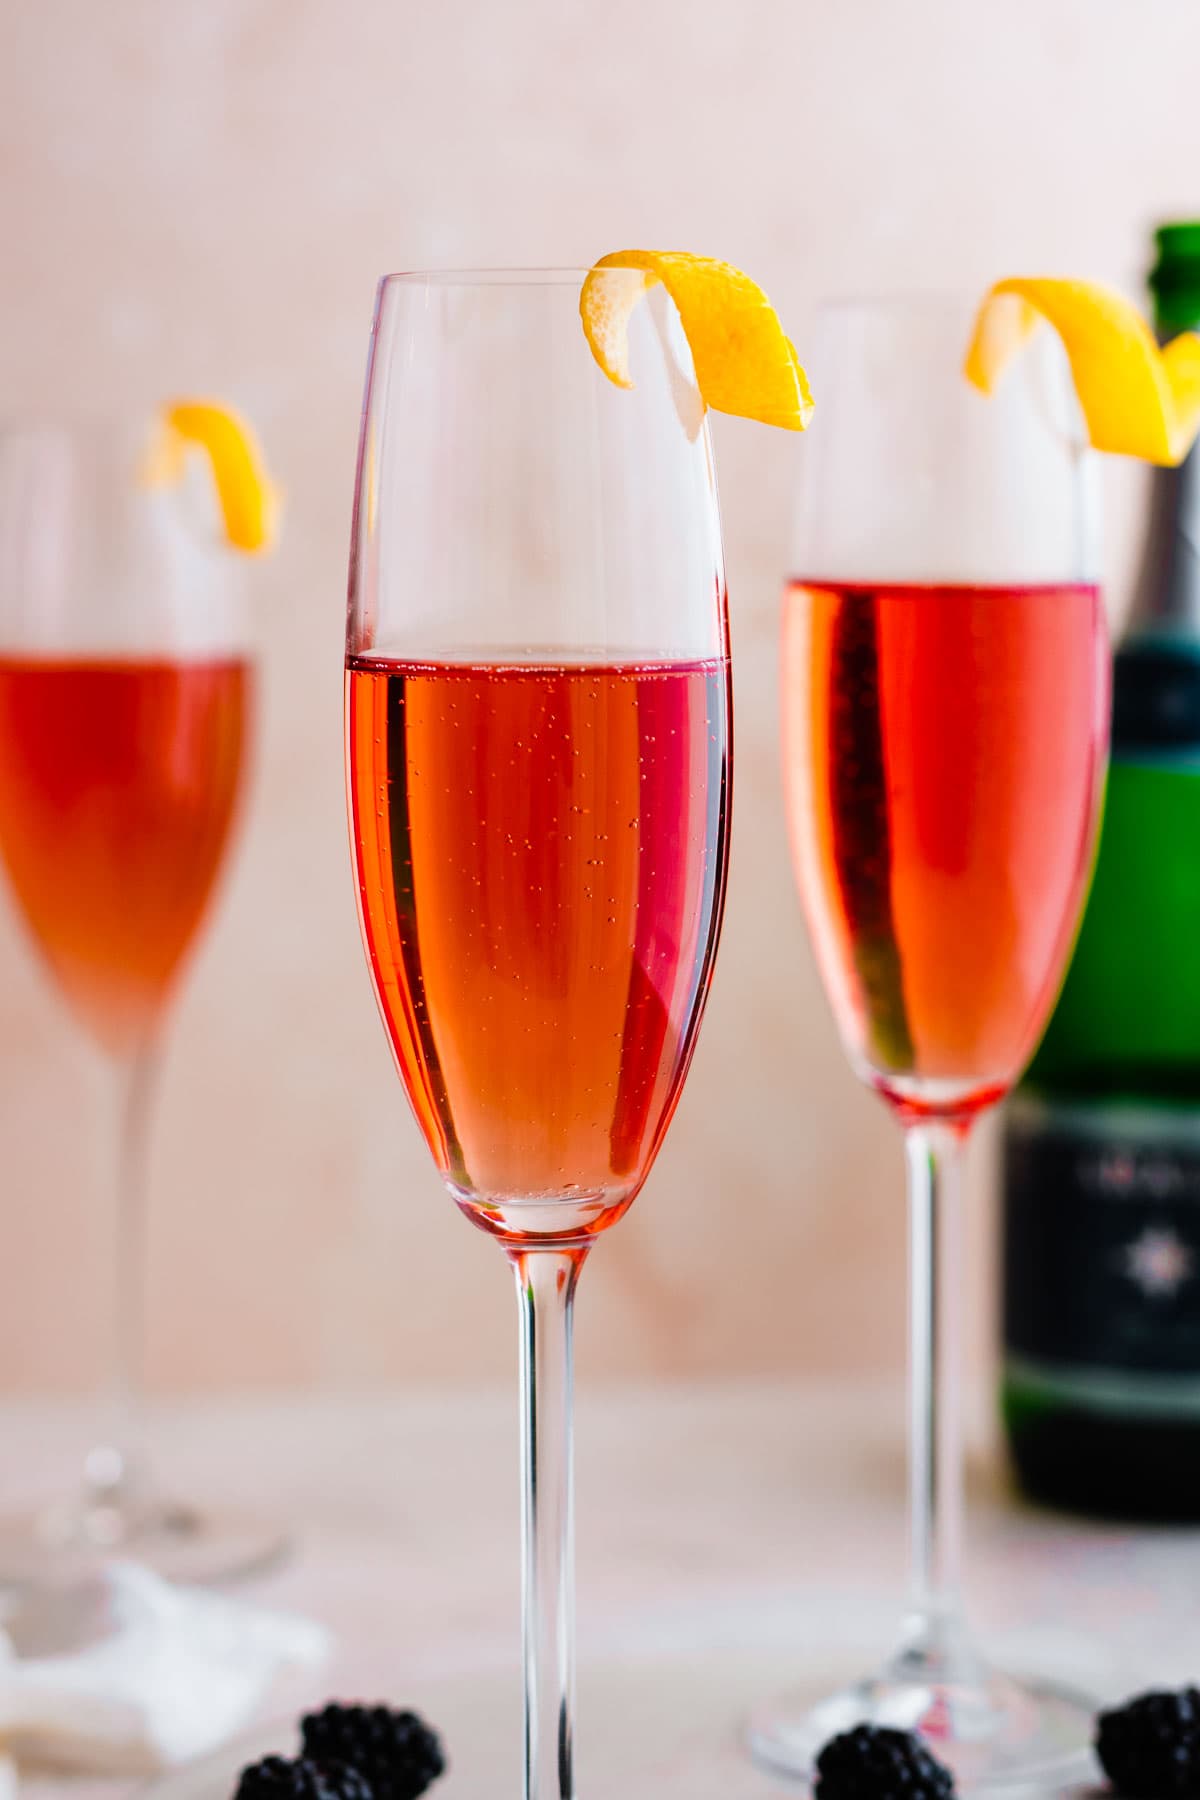 Kir Royale: A French Cocktail for Celebrations